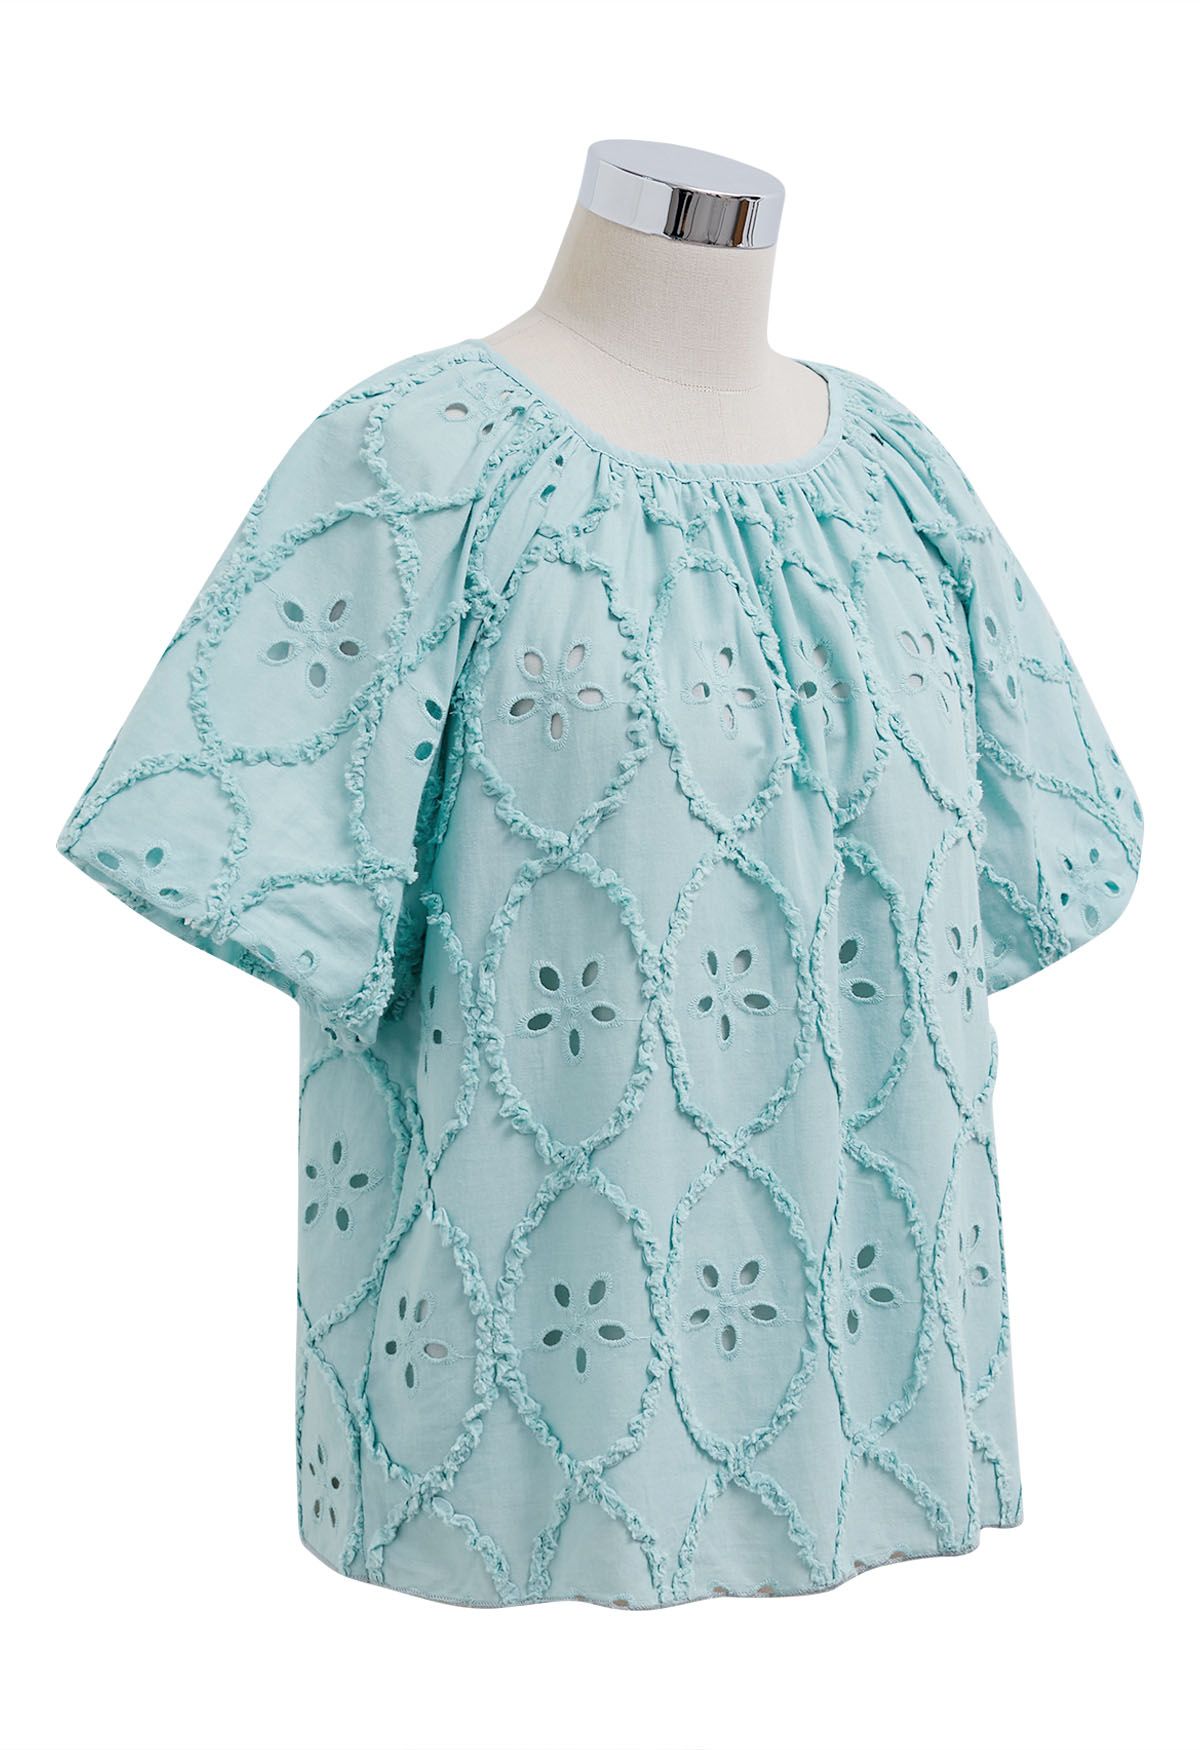 Floral Eyelet Embroidery Bubble Sleeves Top in Turquoise